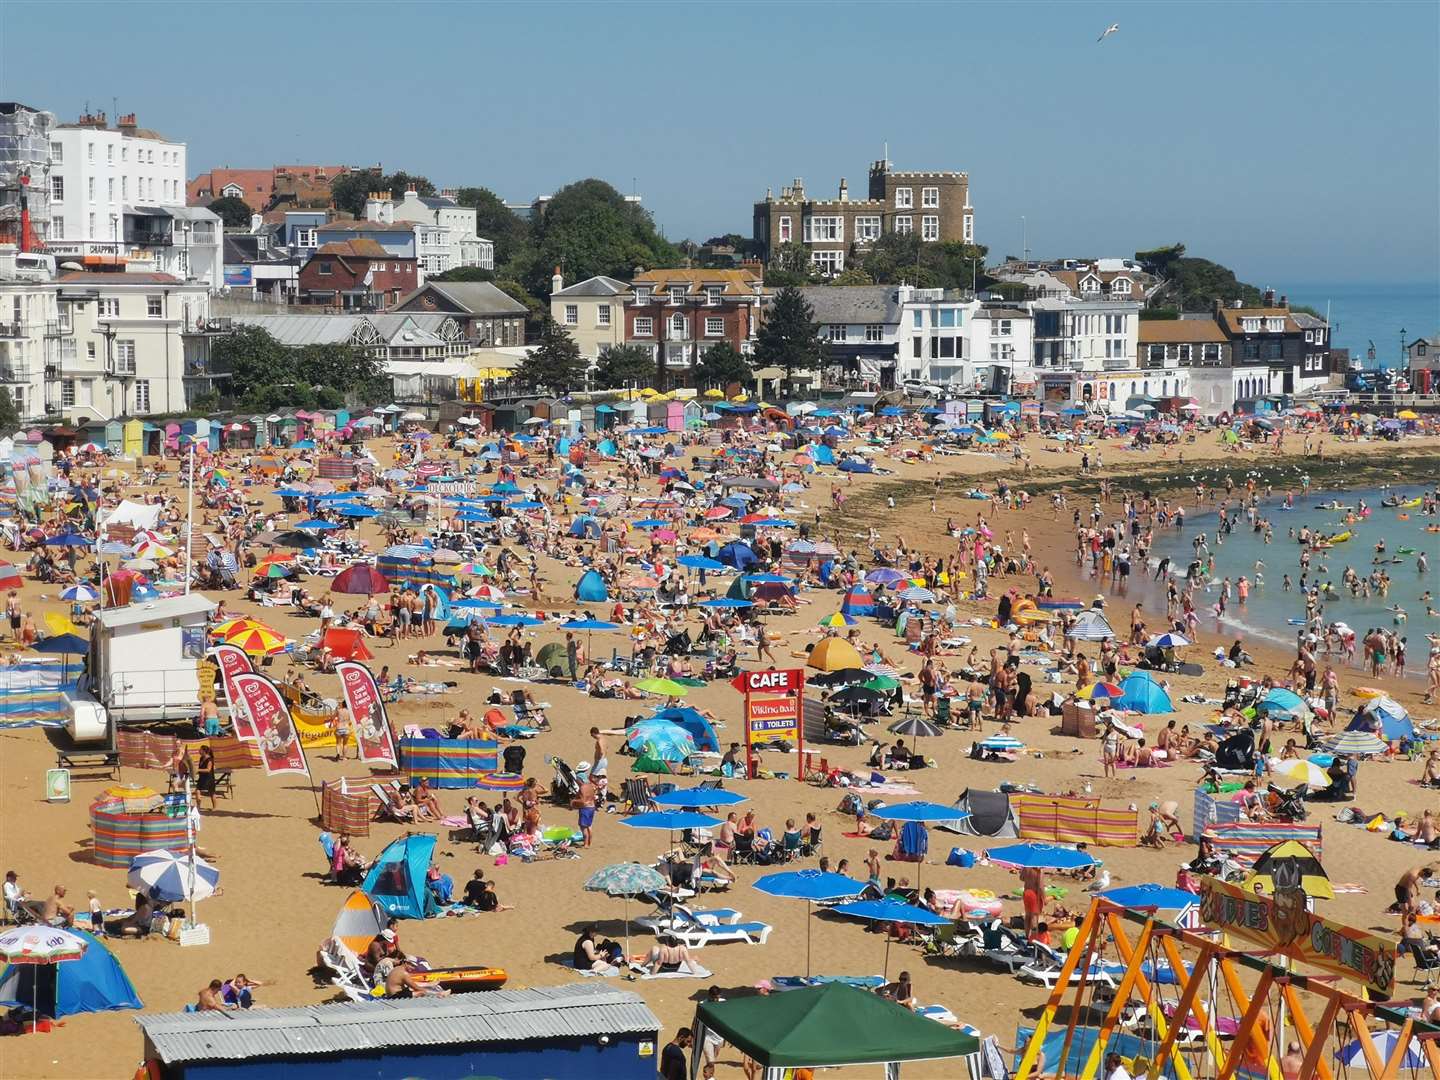 Thanet's beaches are again expected to be busy today with no end yet to the heatwave